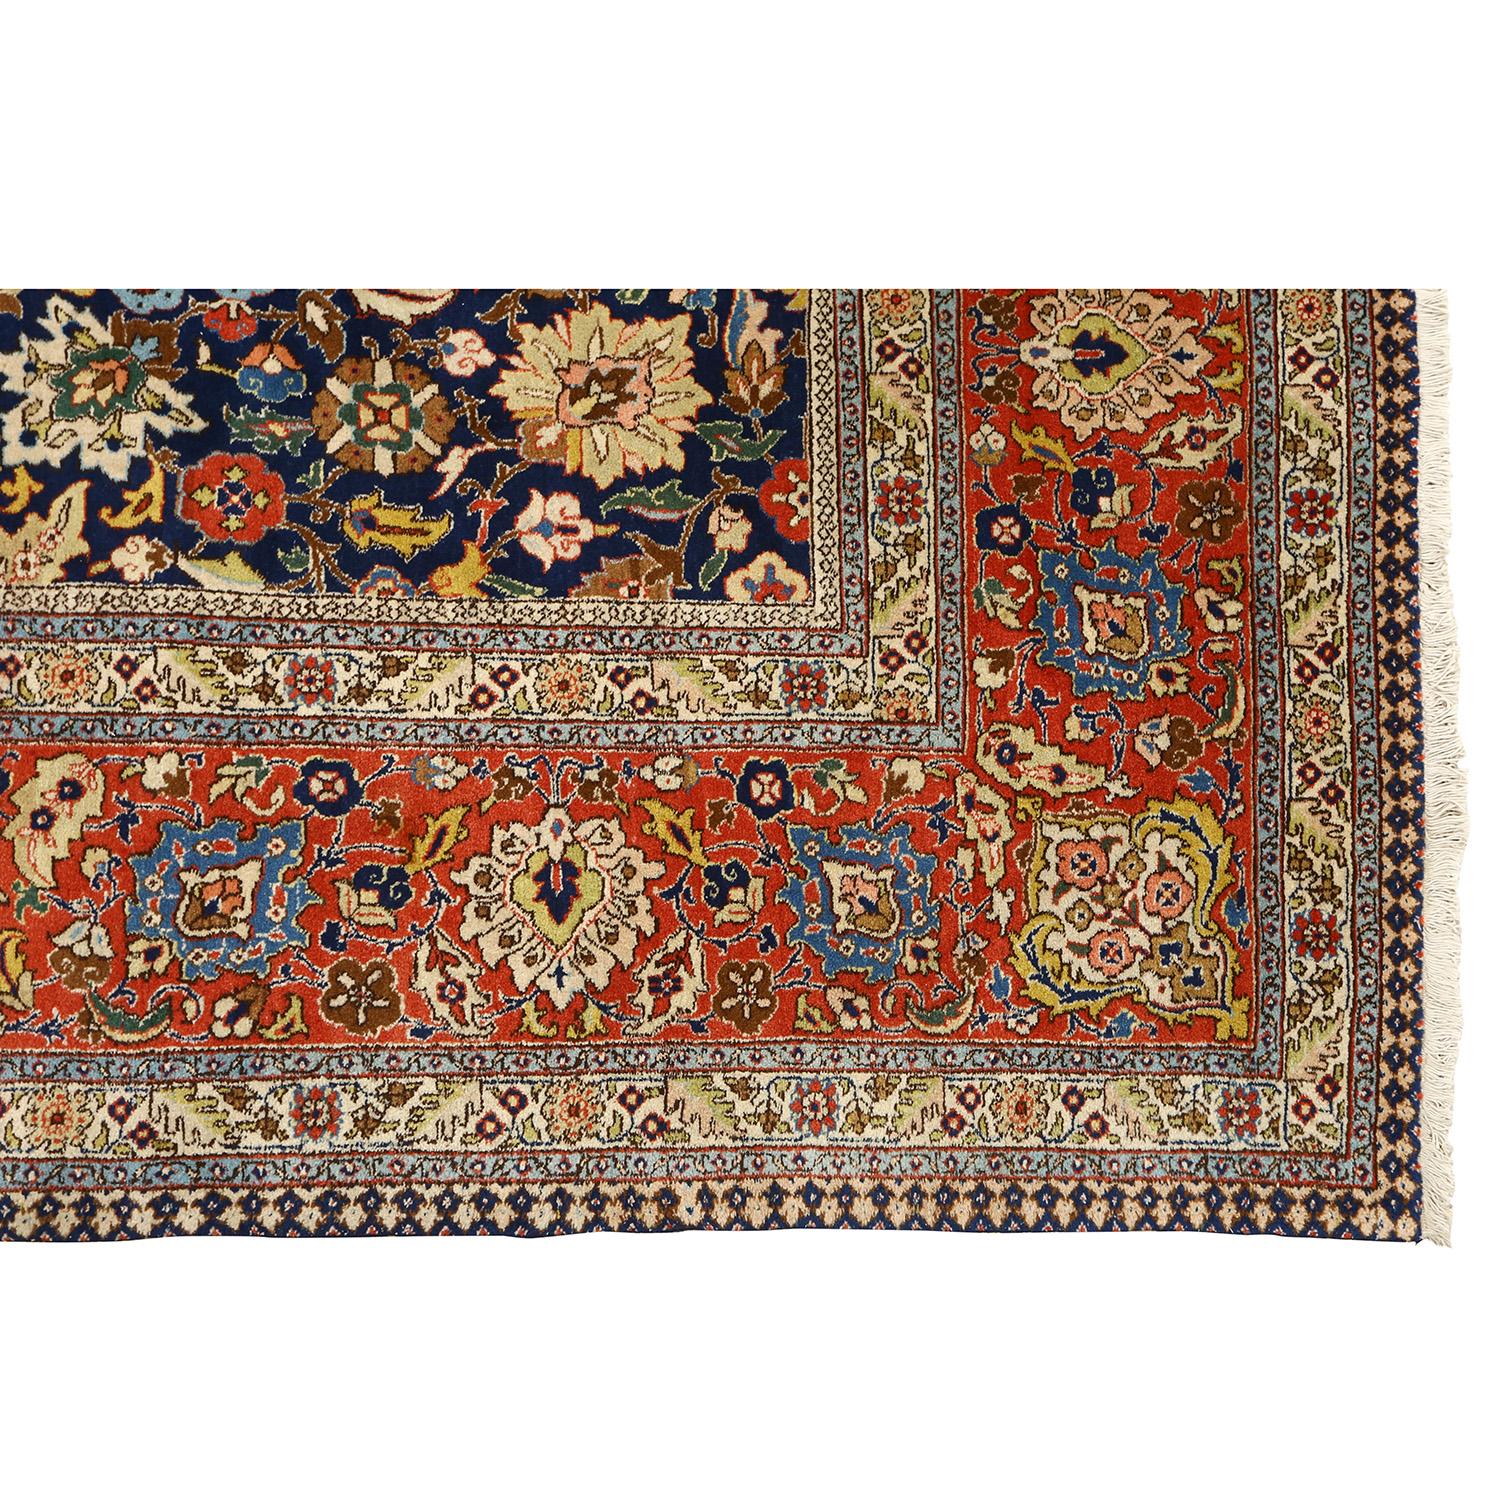 This Antique Tabriz Rug featuring an All-Over Design is a captivating testament to the rich tradition of Persian craftsmanship and artistry. Hailing from the esteemed weaving city of Tabriz, these rugs are renowned for their intricate patterns that